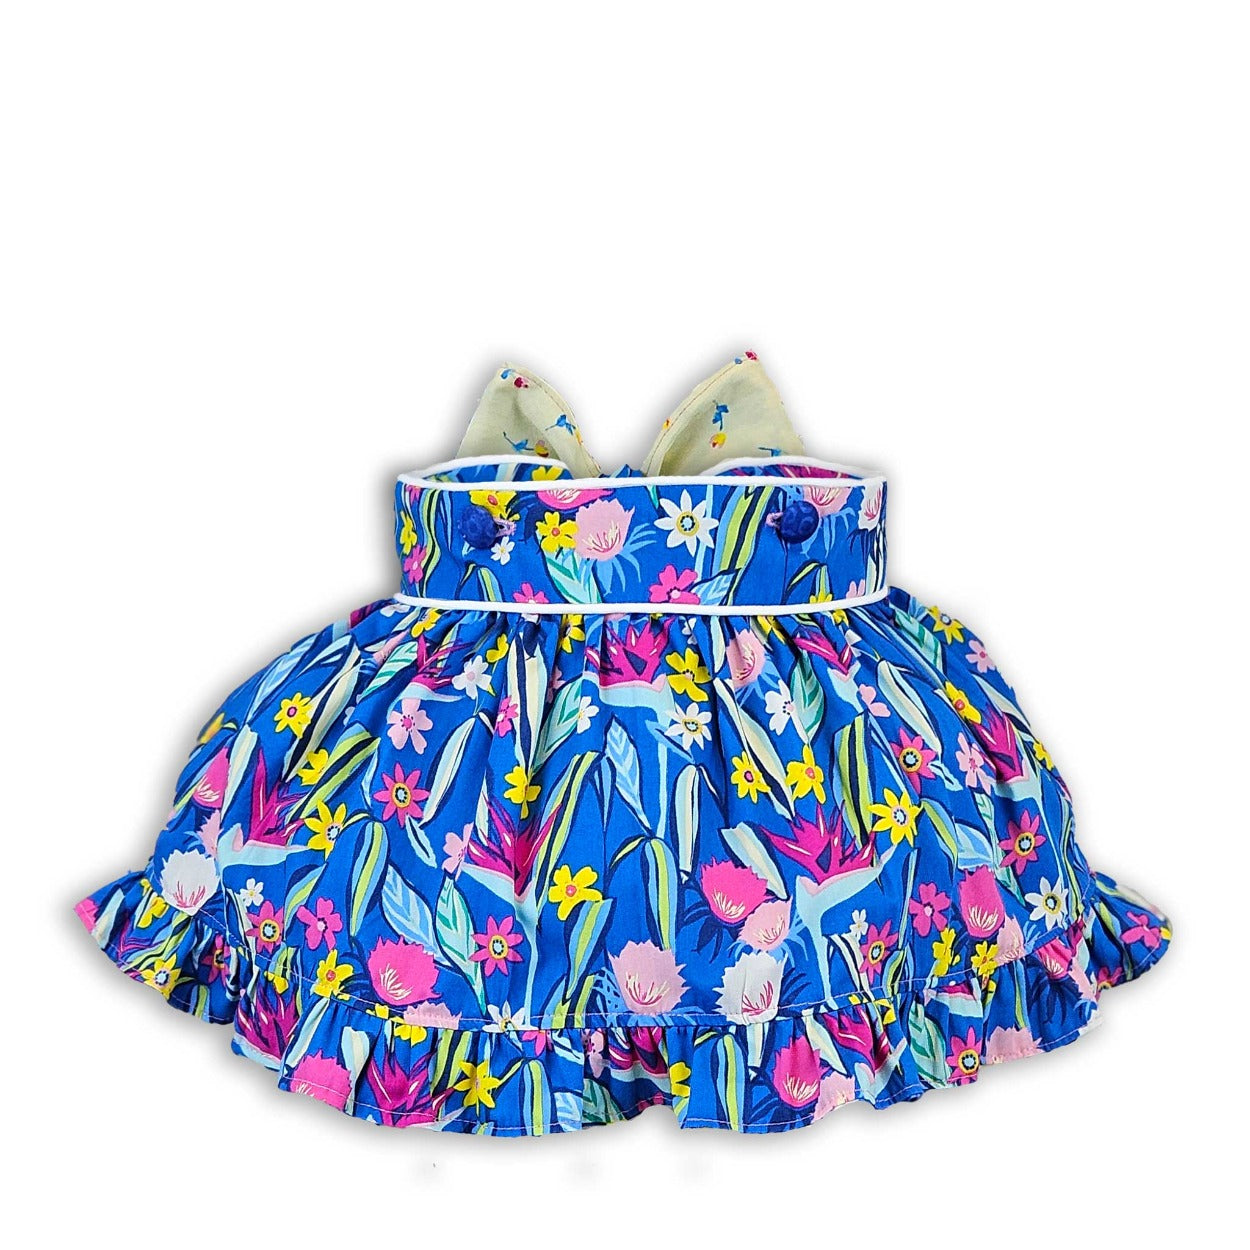 girls full skirt with bow in blue flowers and yellow bow